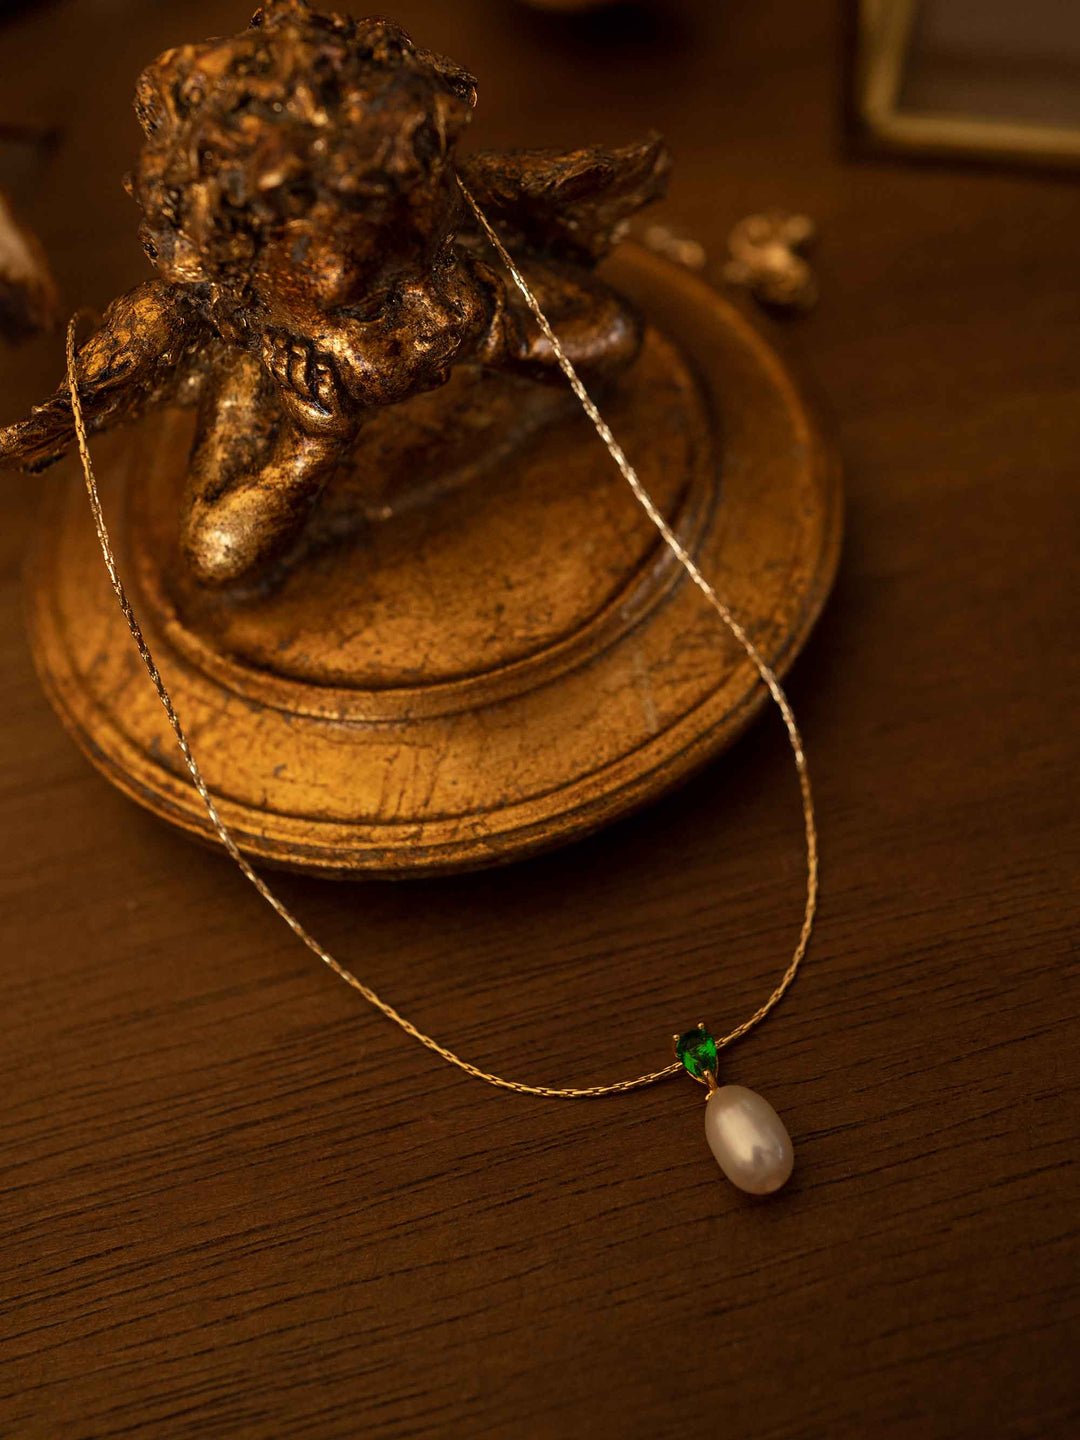 A pearl necklace with a minimalist design